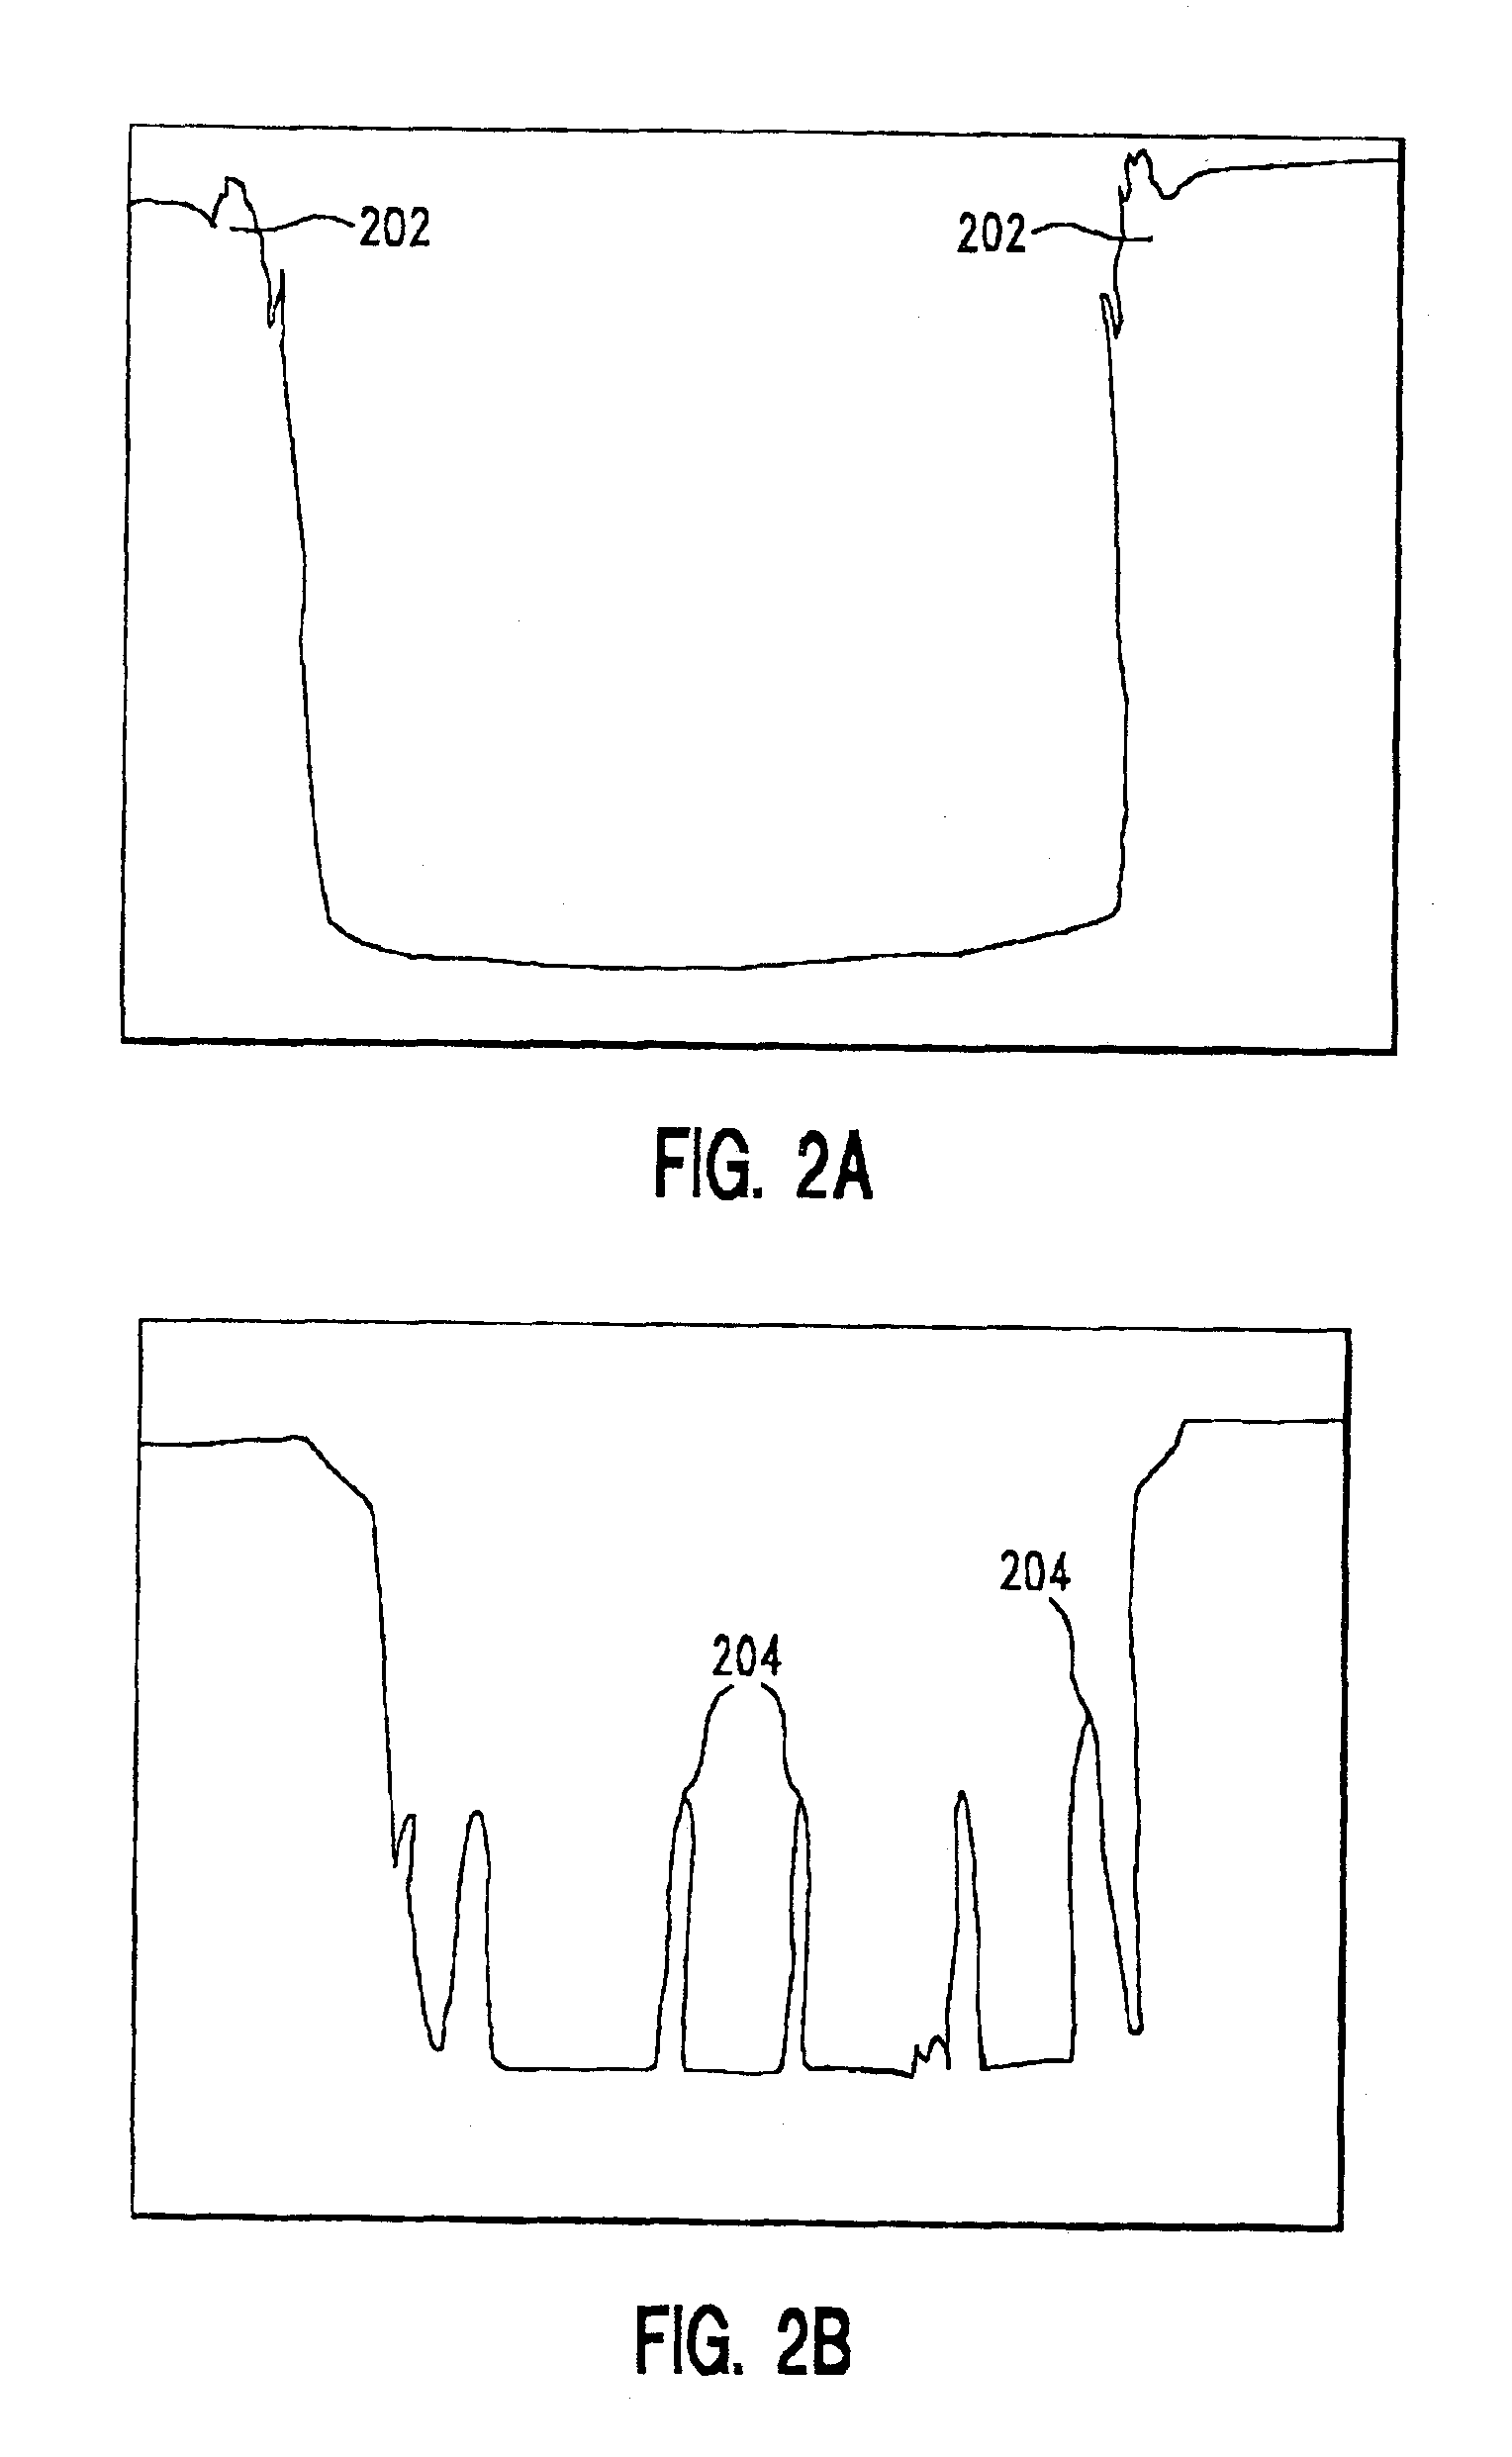 Method of etching a deep trench having a tapered profile in silicon